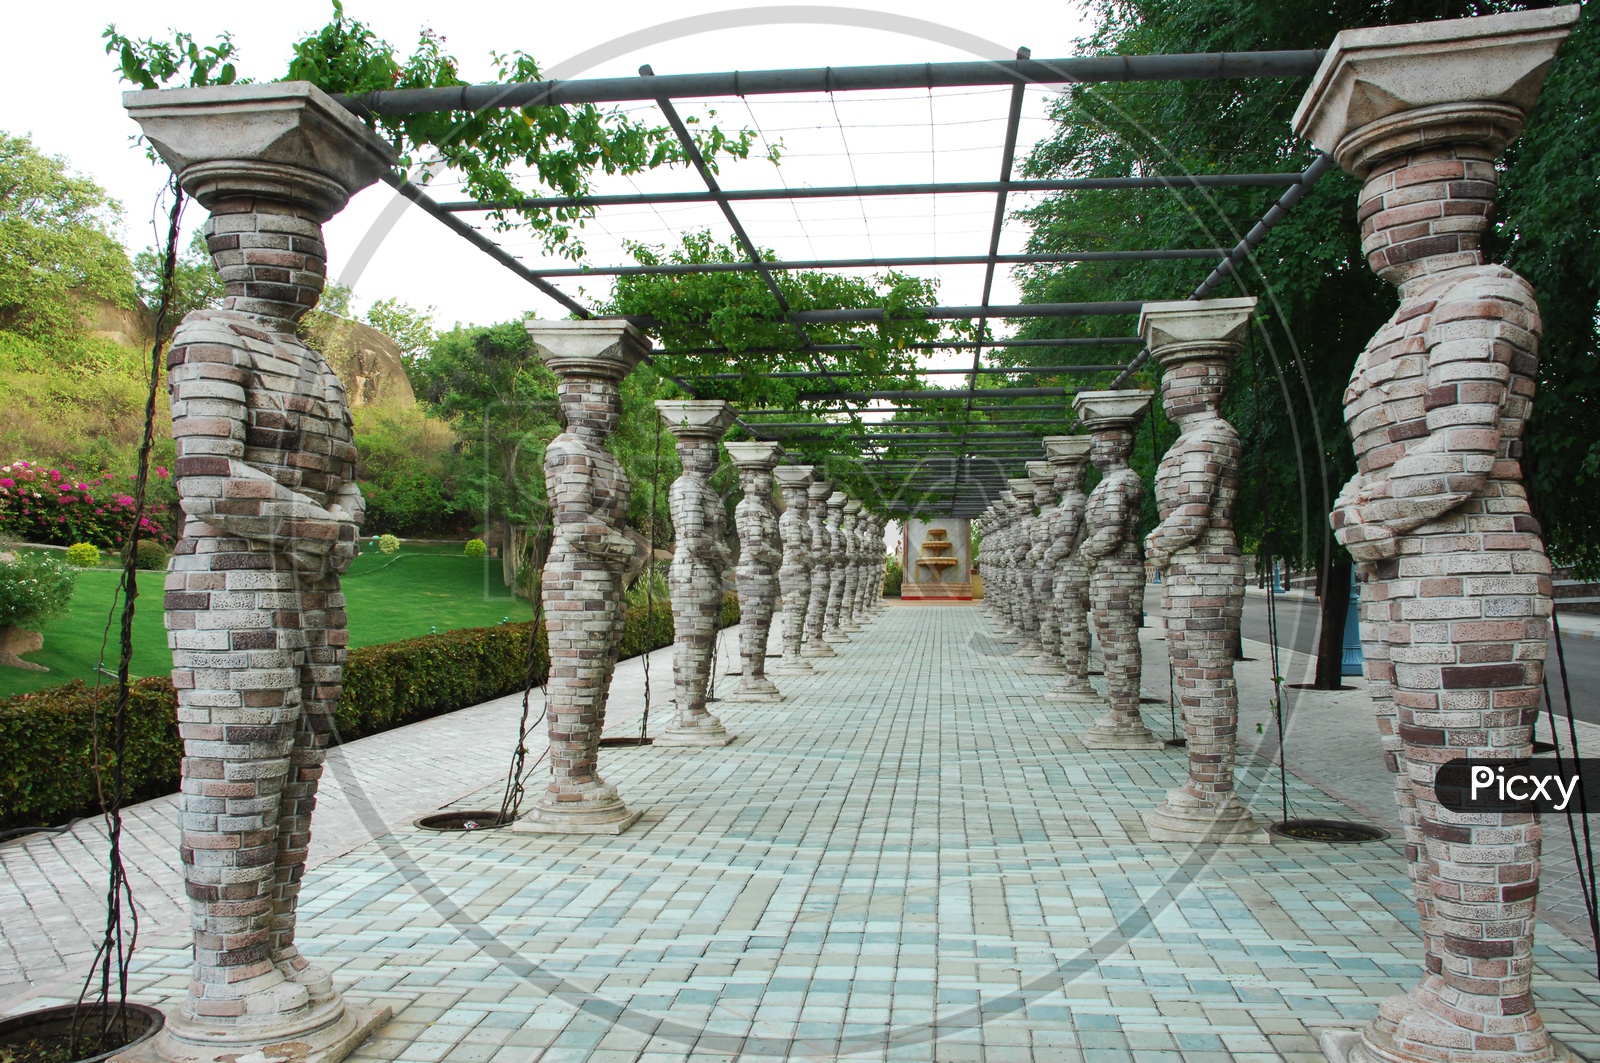 Human shaped pillars support for the creeper plant